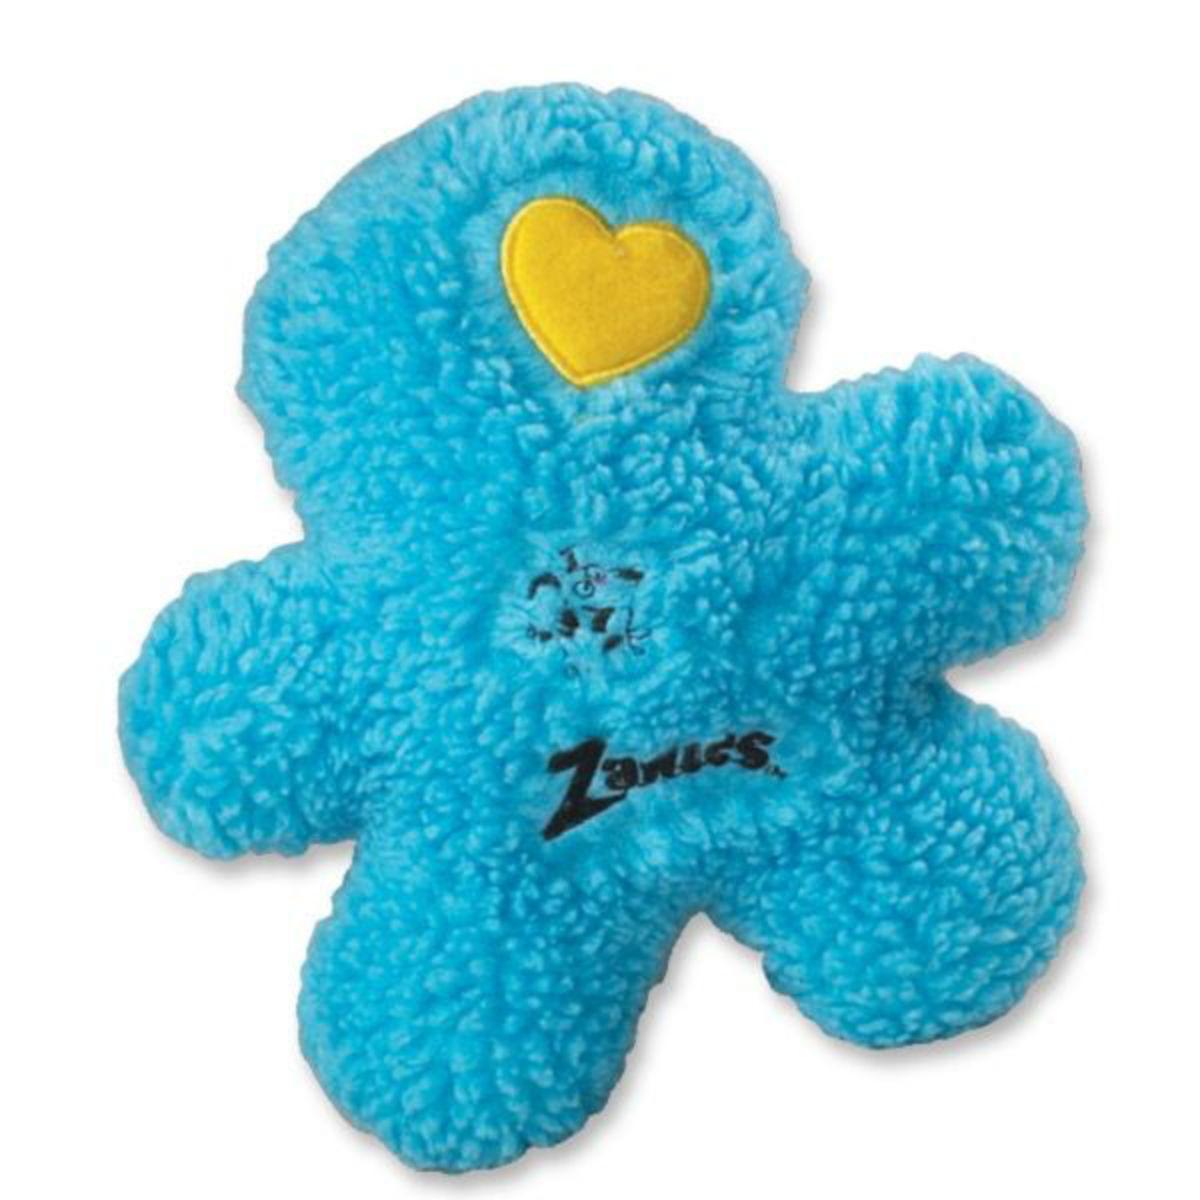 Zanies Embroidered Berber Boys Dog Toy - Blue